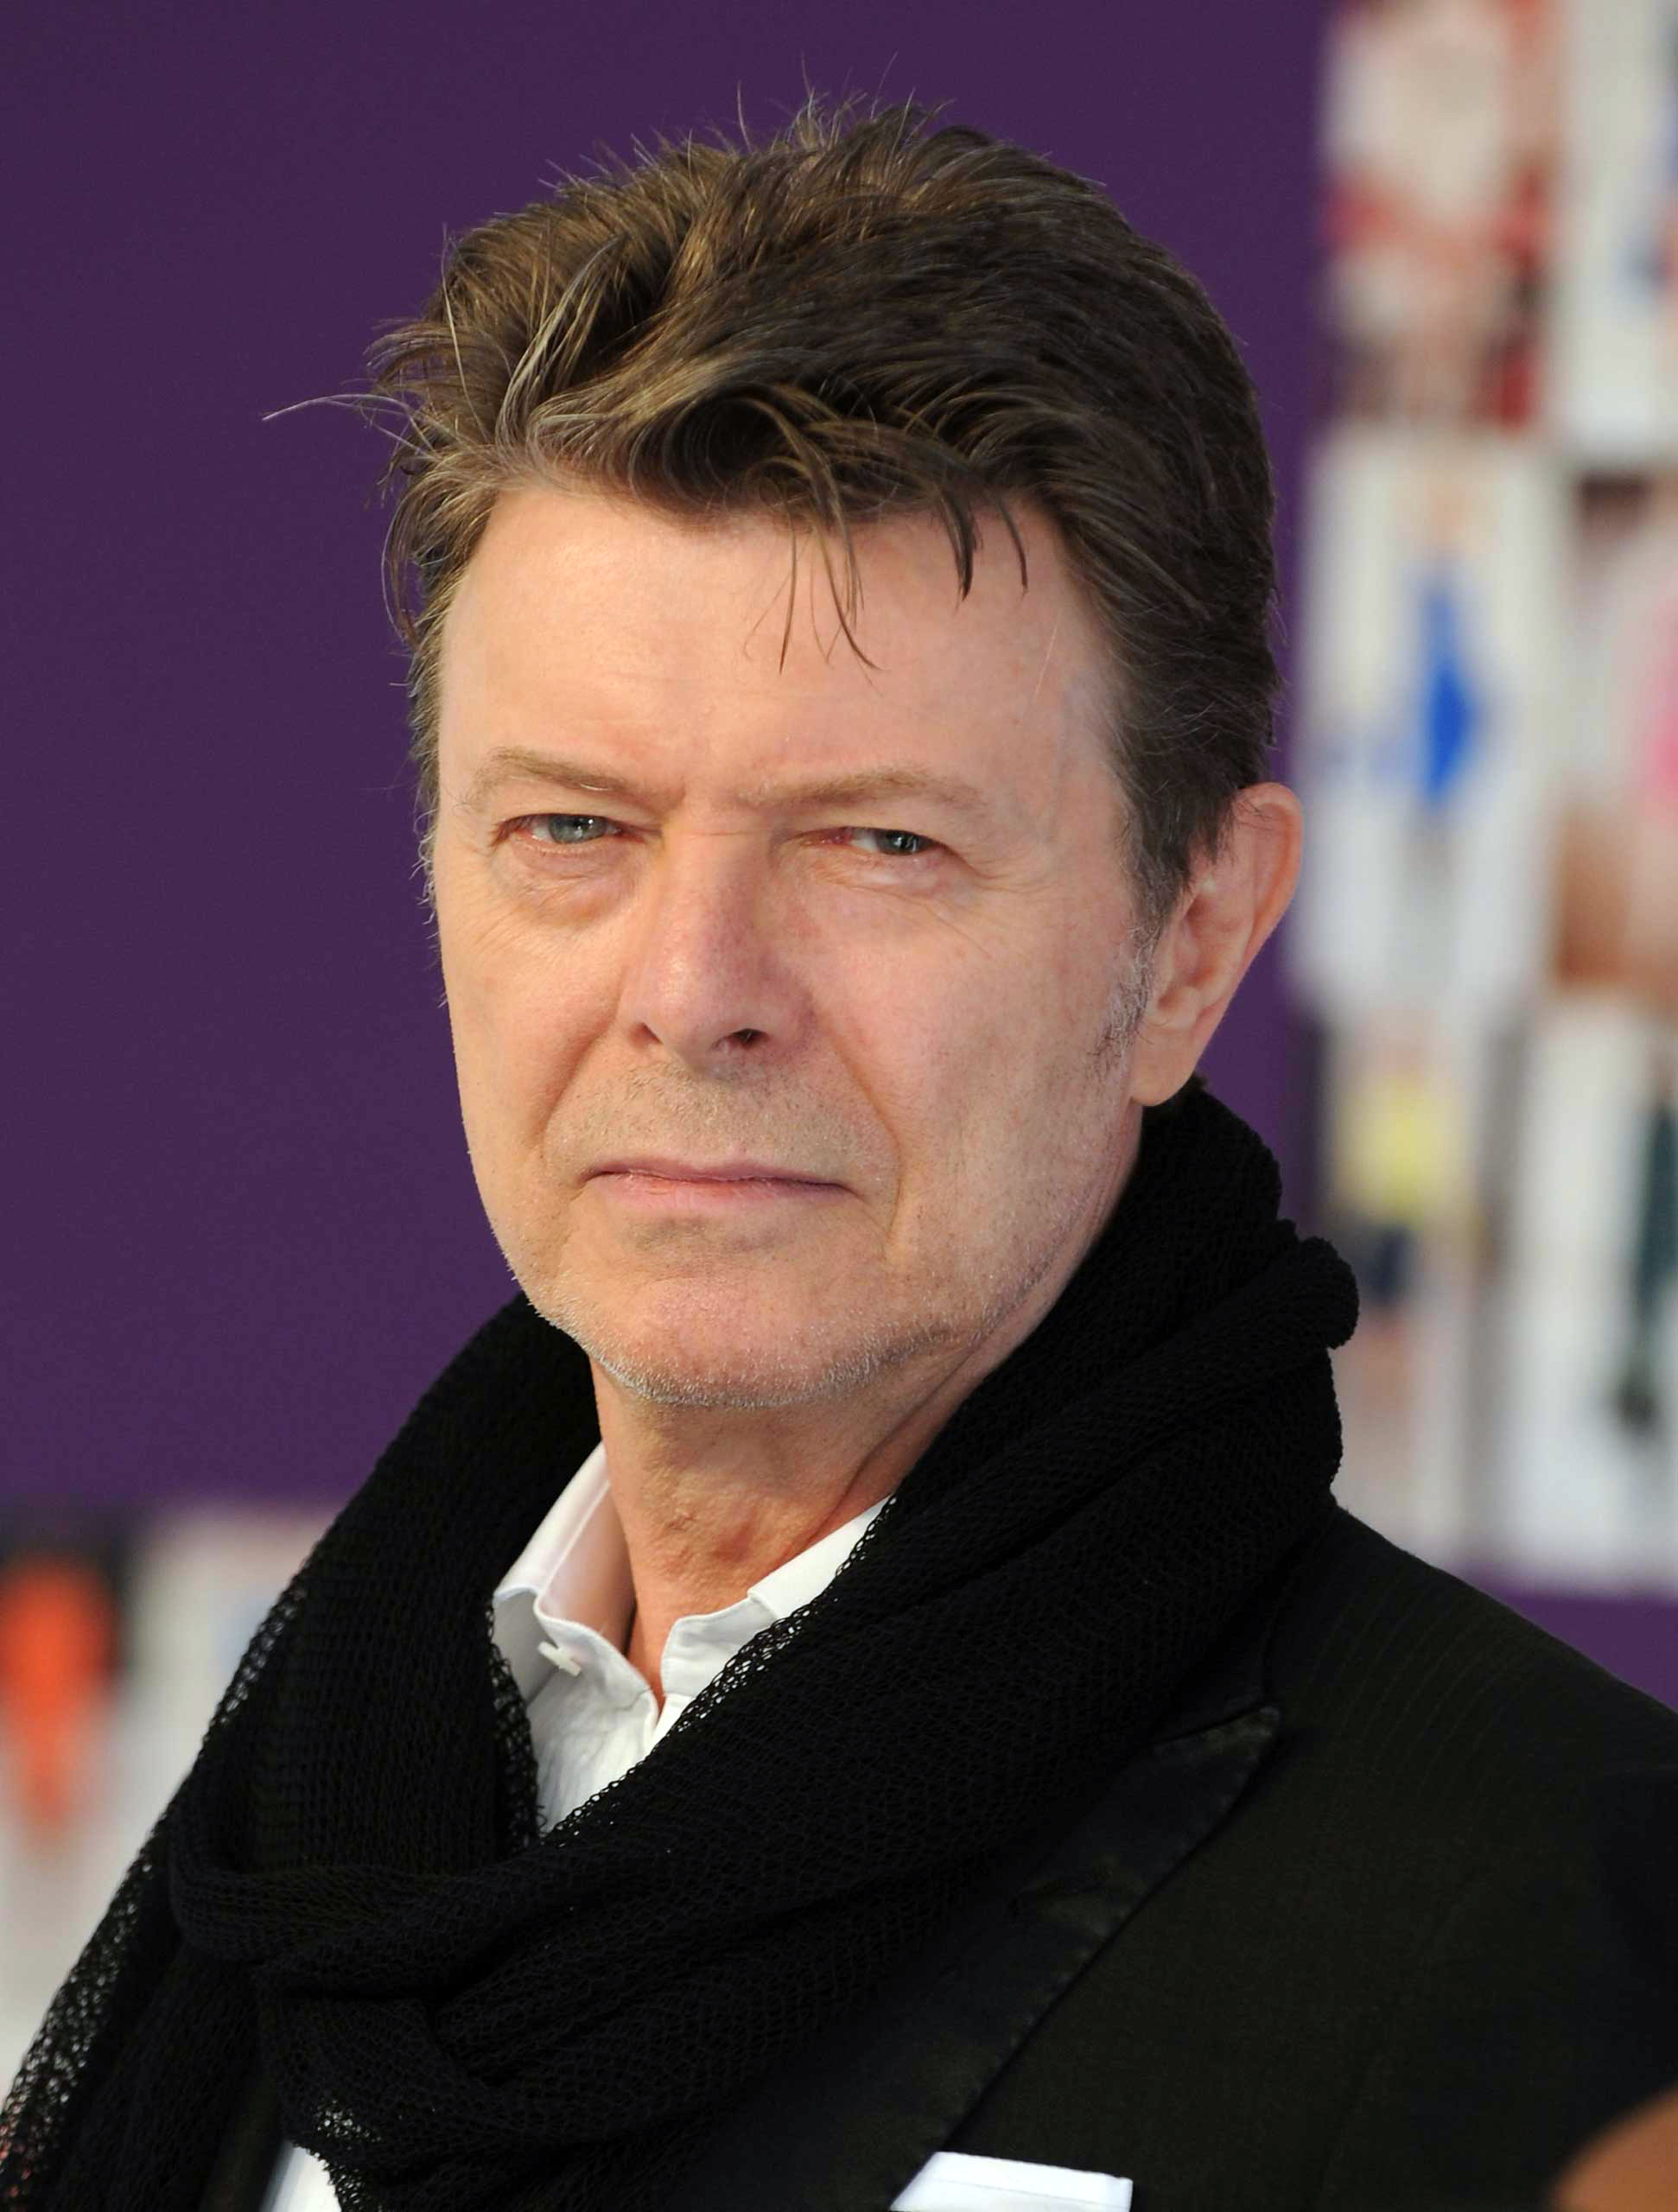 Musician David Bowie attends the 2010 CFDA Fashion Awards at Alice Tully Hall at Lincoln Center in New York Cit yon June 7, 2010 .